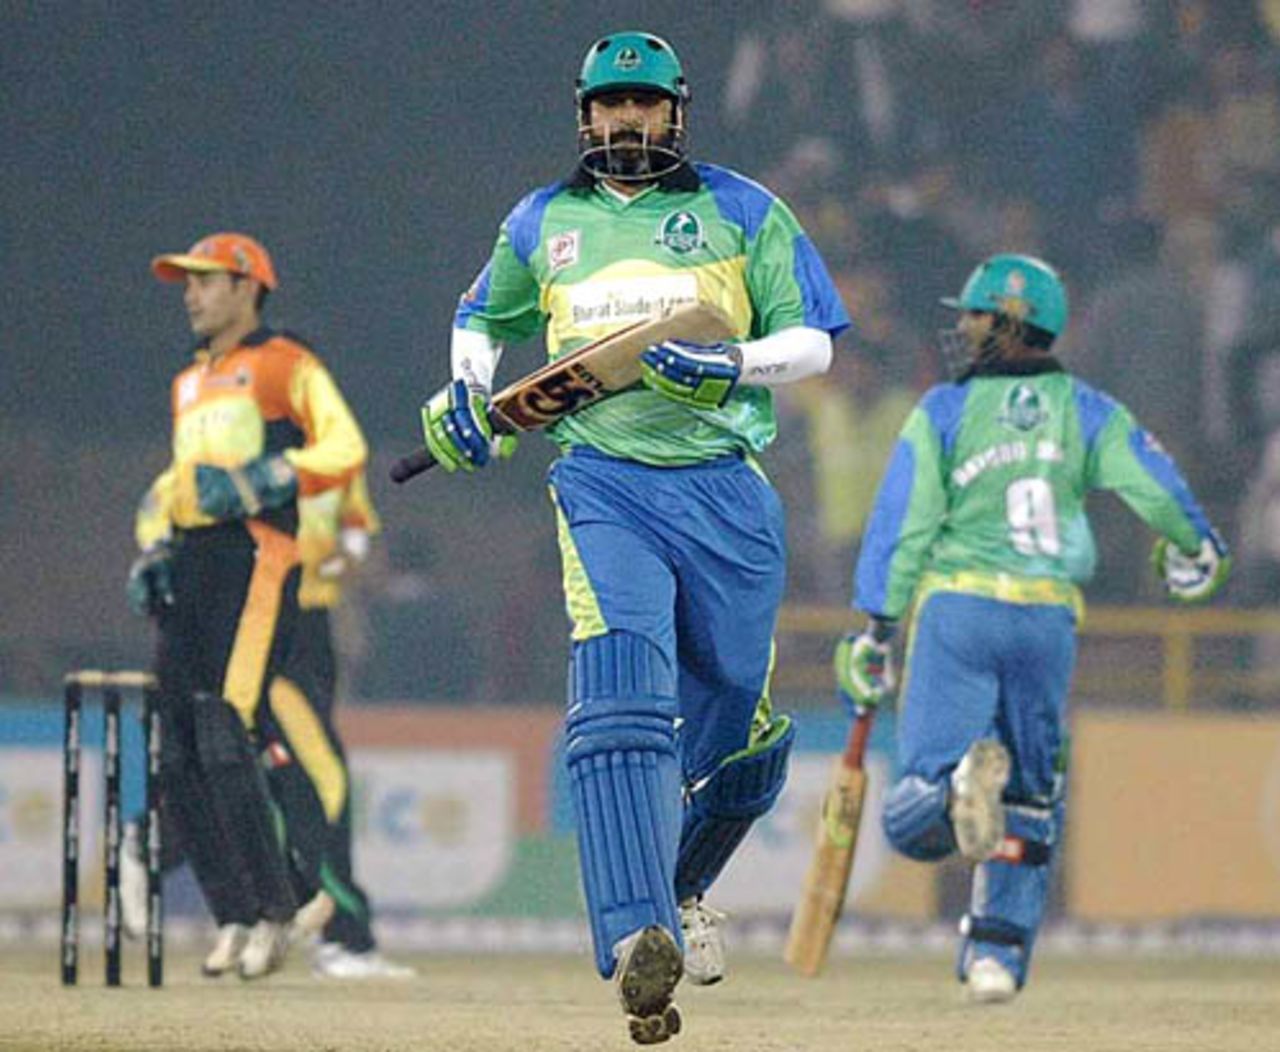 Inzamam-ul-Haq top scored for Hyderabad Heroes with 42, Mumbai Champs v Hyderabad Heroes, Indian Cricket League, December 1, 2007